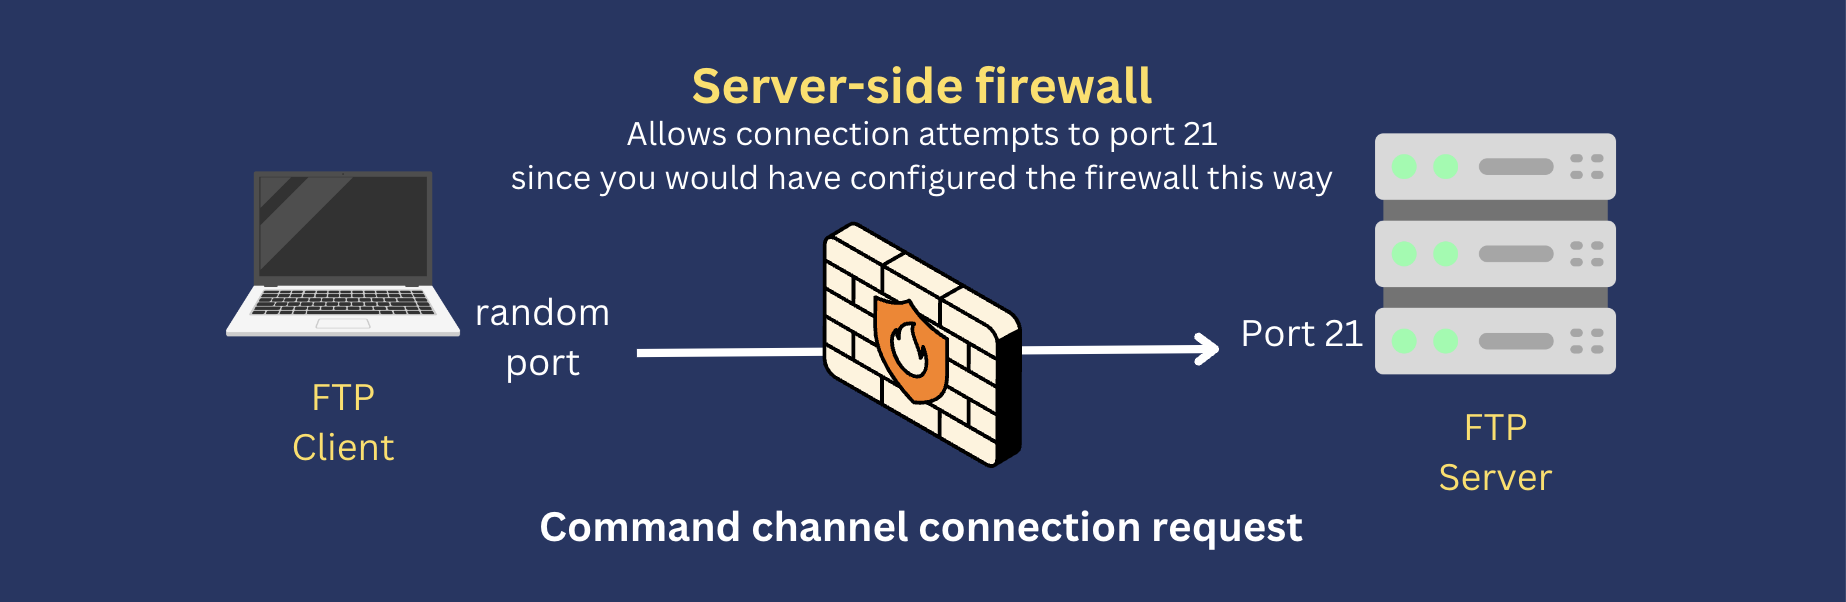 command channel connection request